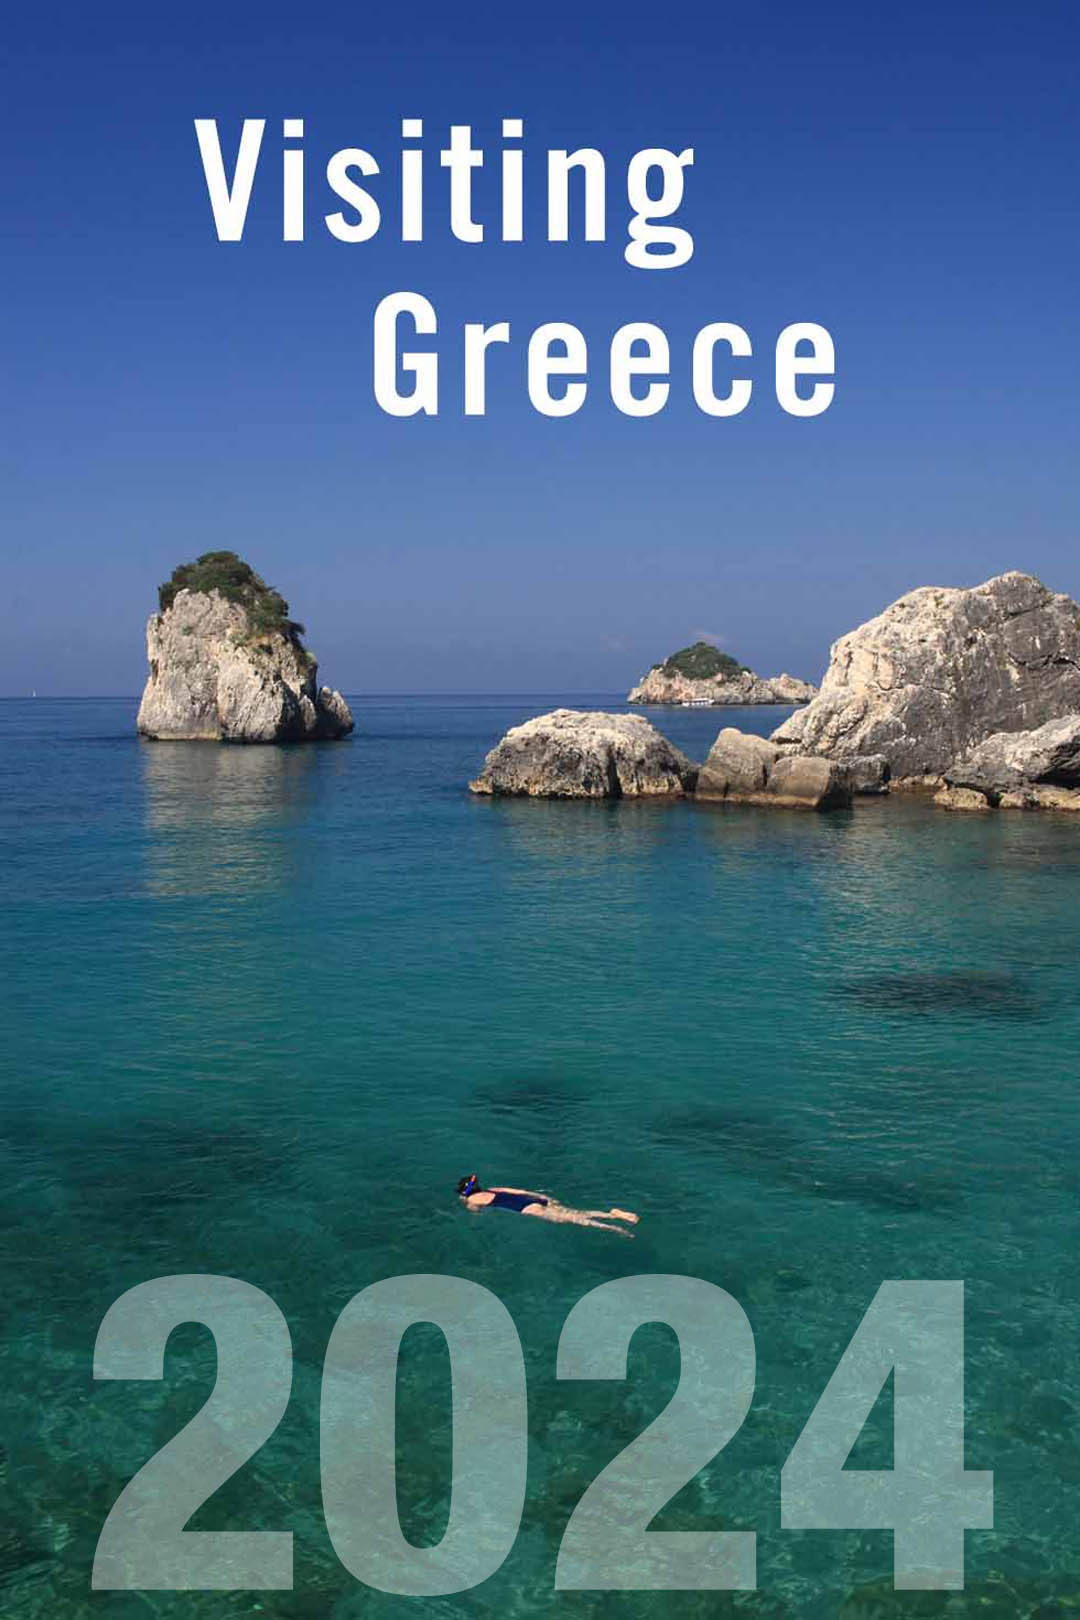 Visiting Greece for a beautiful vacation